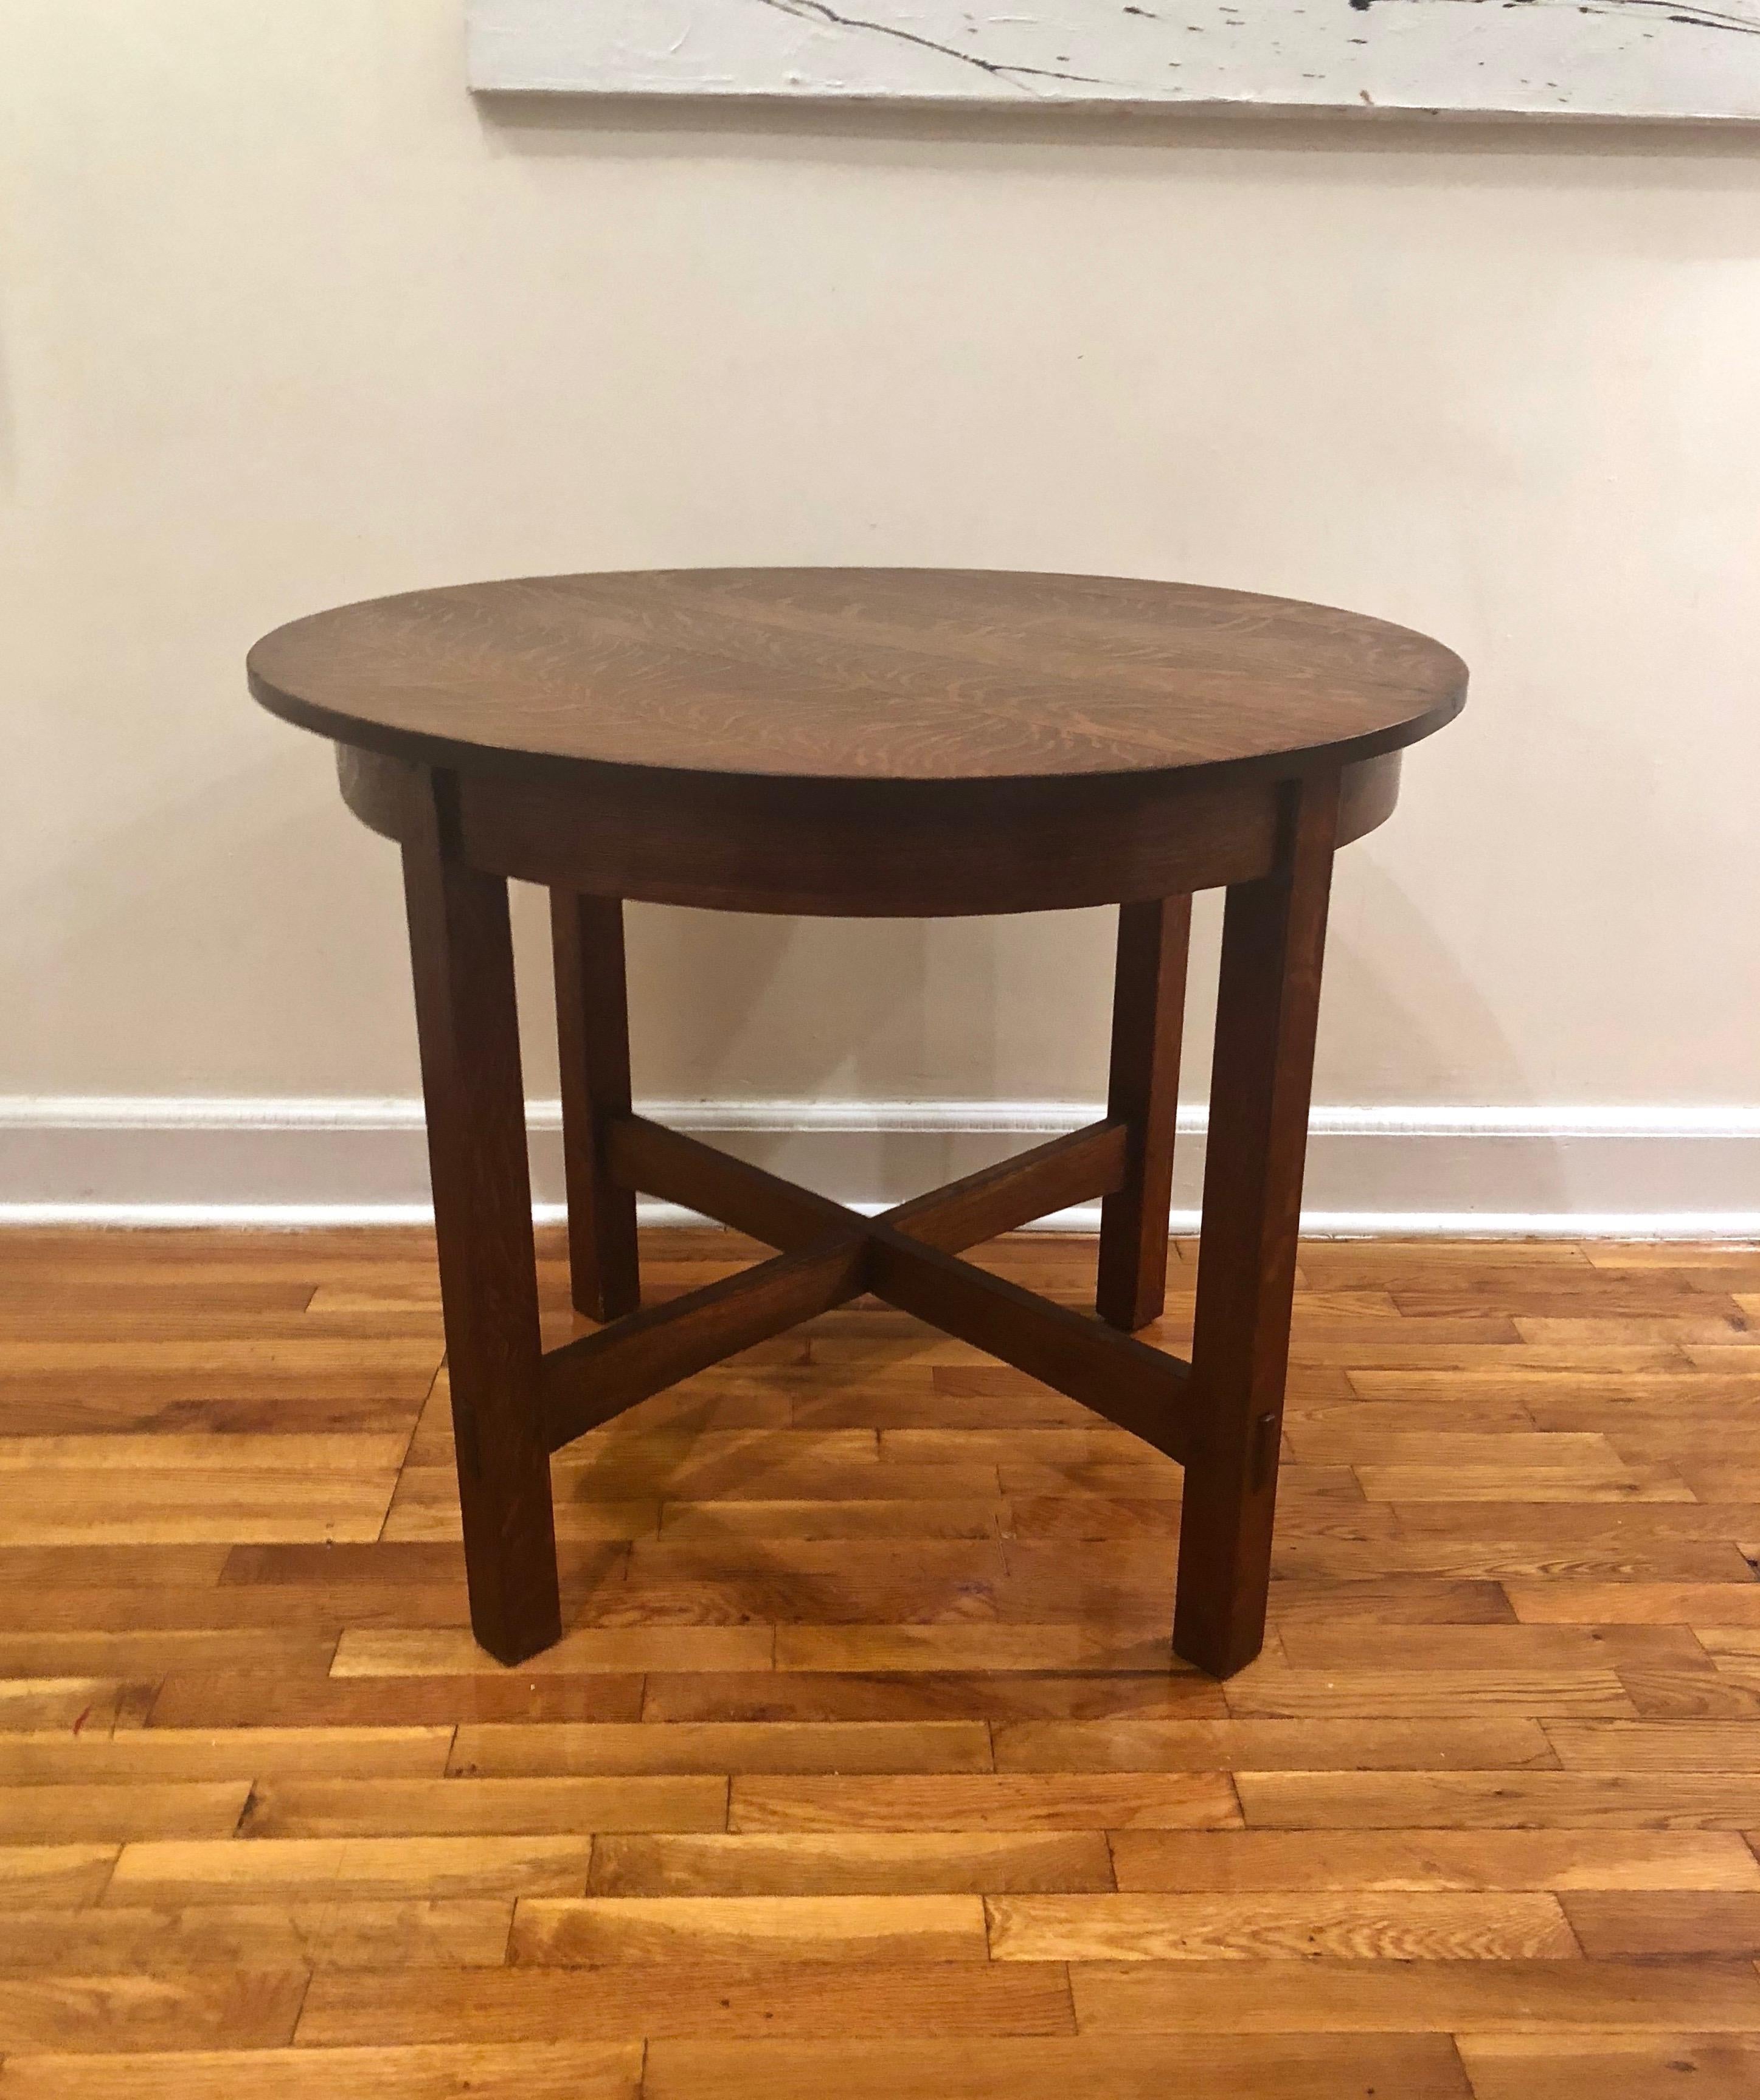 Stickley Arts & Crafts round dining or center table in tiger oak with a x-shaped stretcher on the bottom.